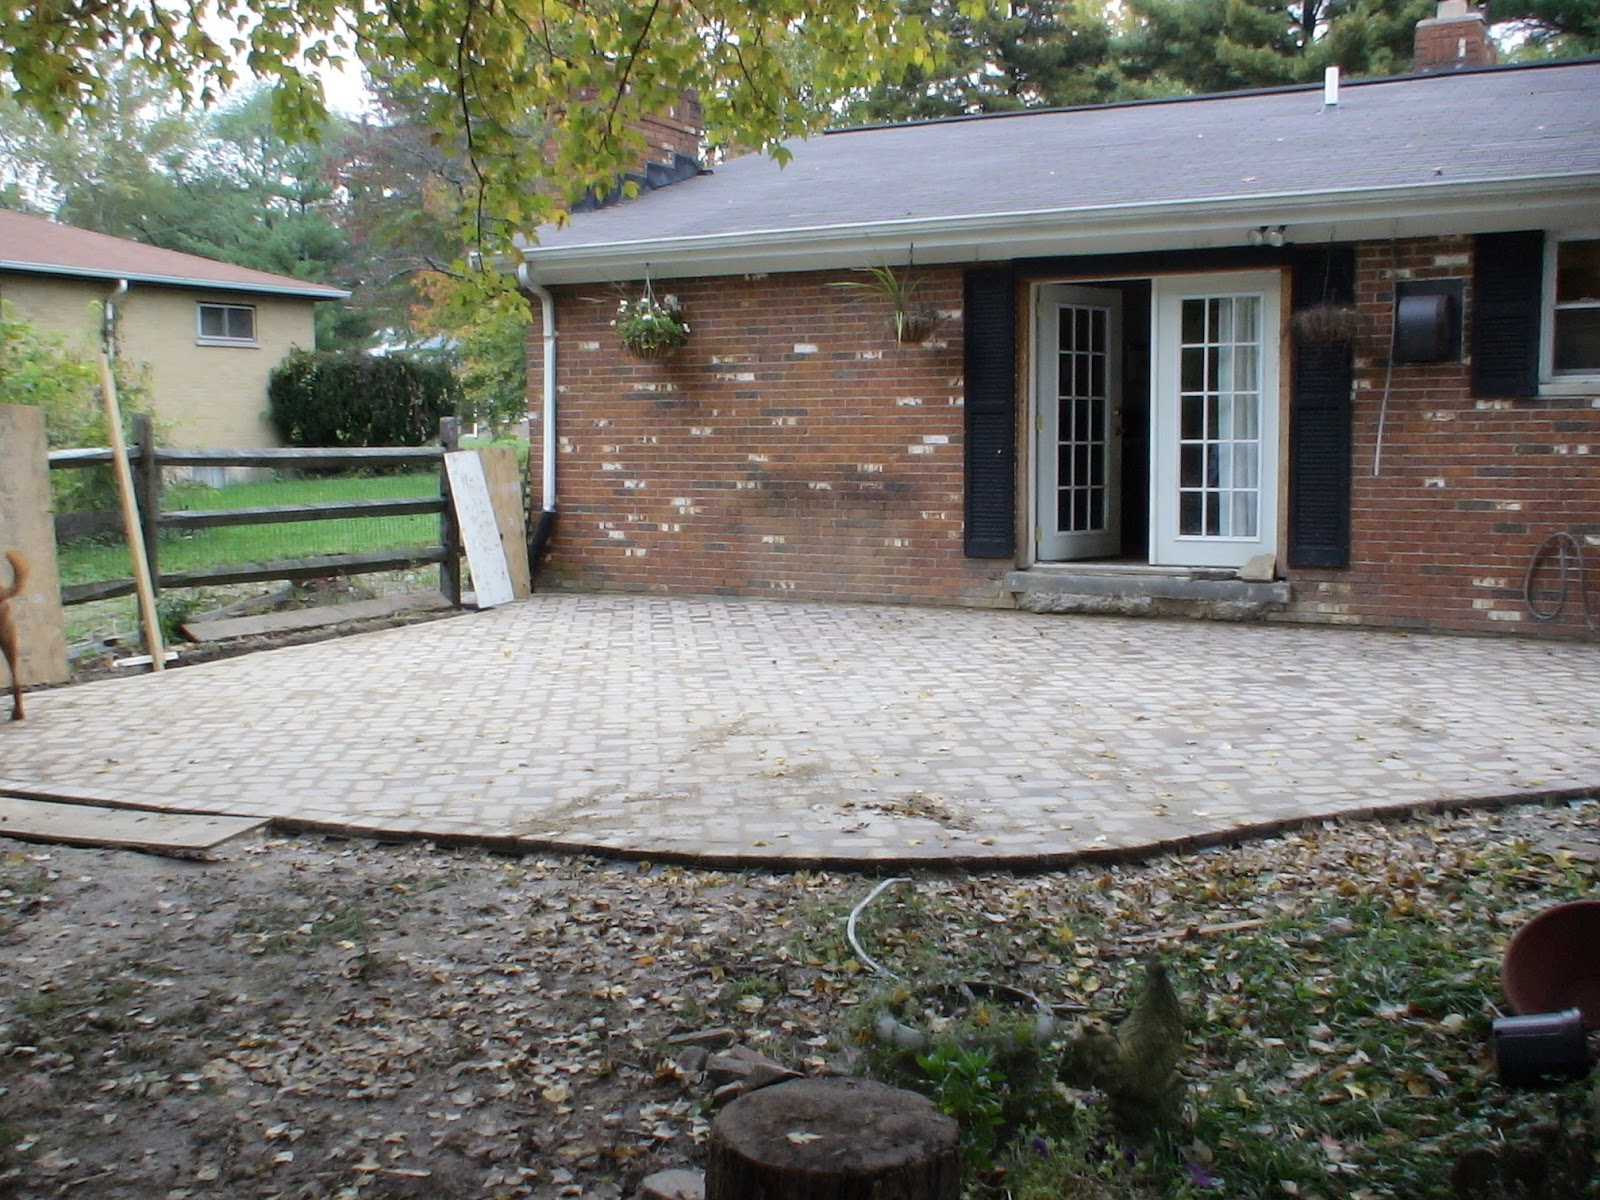 Chez V: Tales from the Projects - DIY Paver Patio & Pond